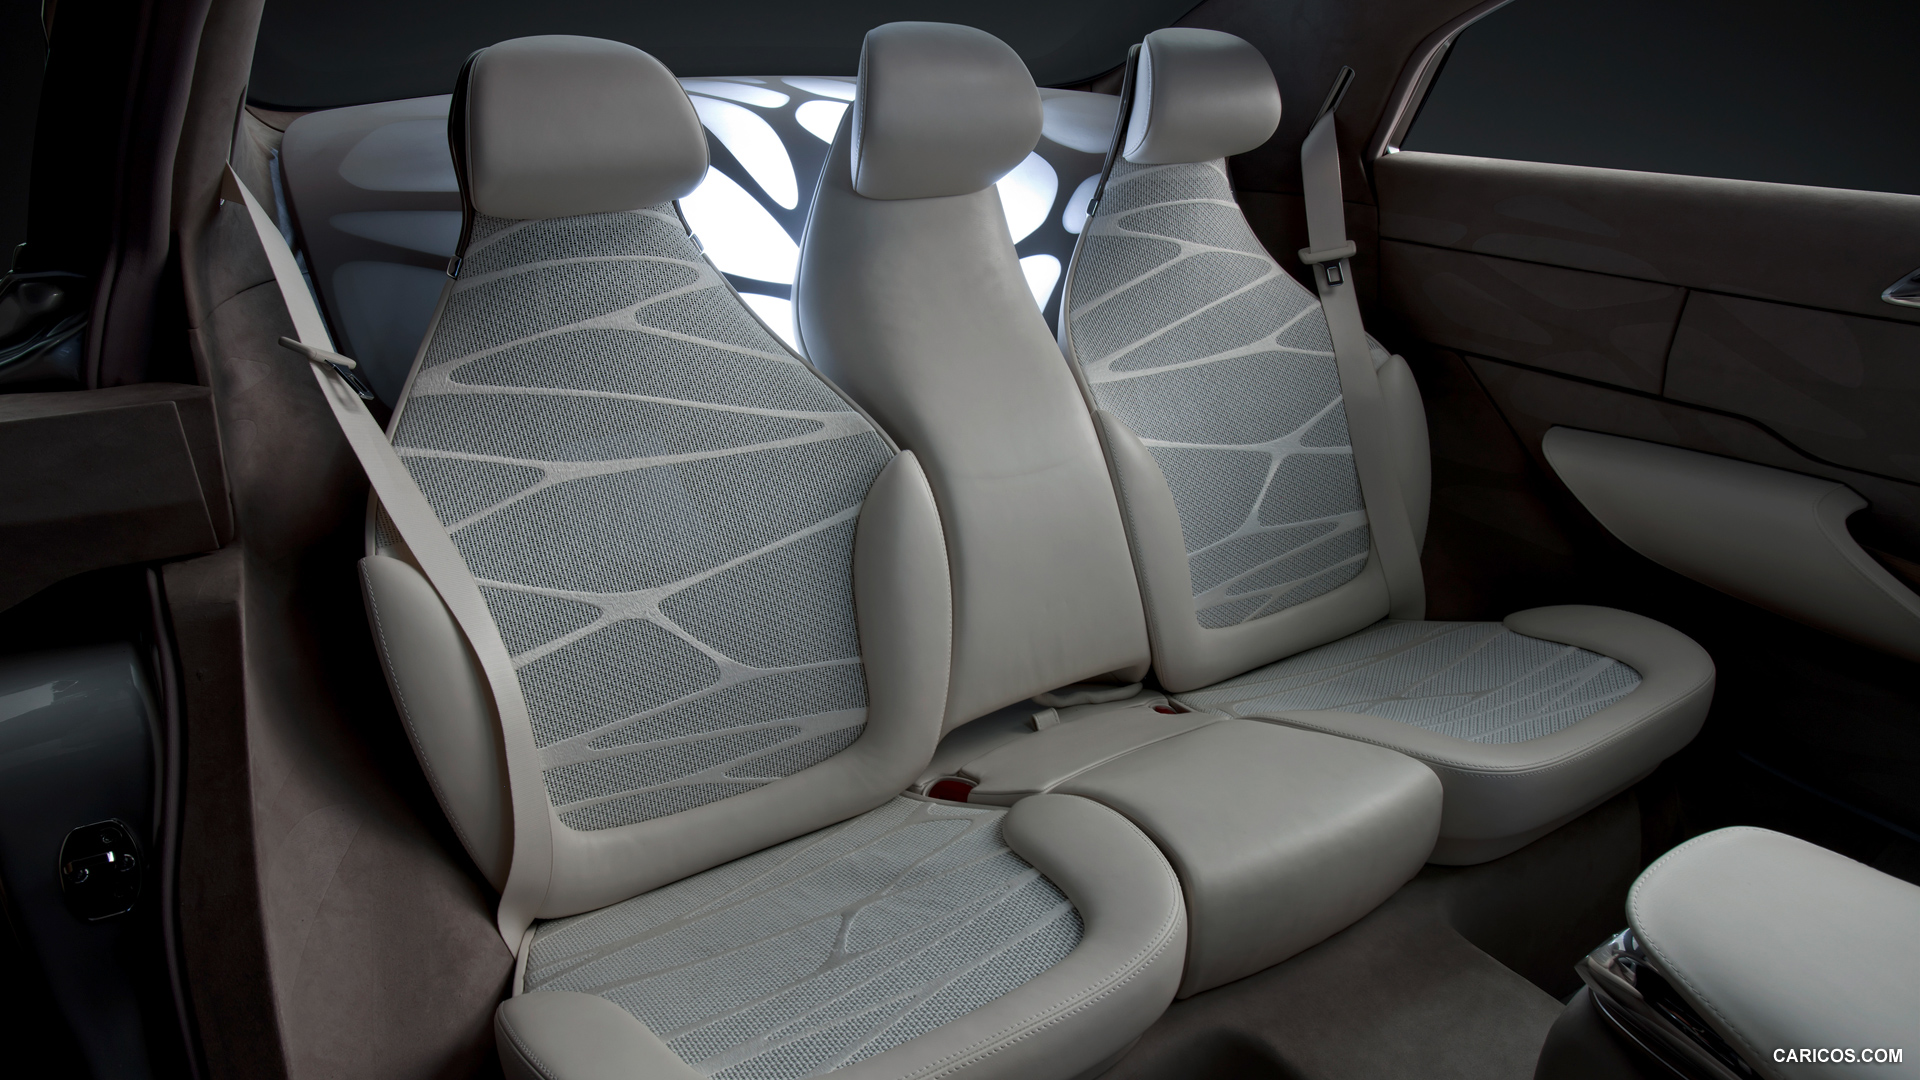 Mercedes-Benz F800 Style Concept (2010)  - Interior, Rear Seats, #48 of 120